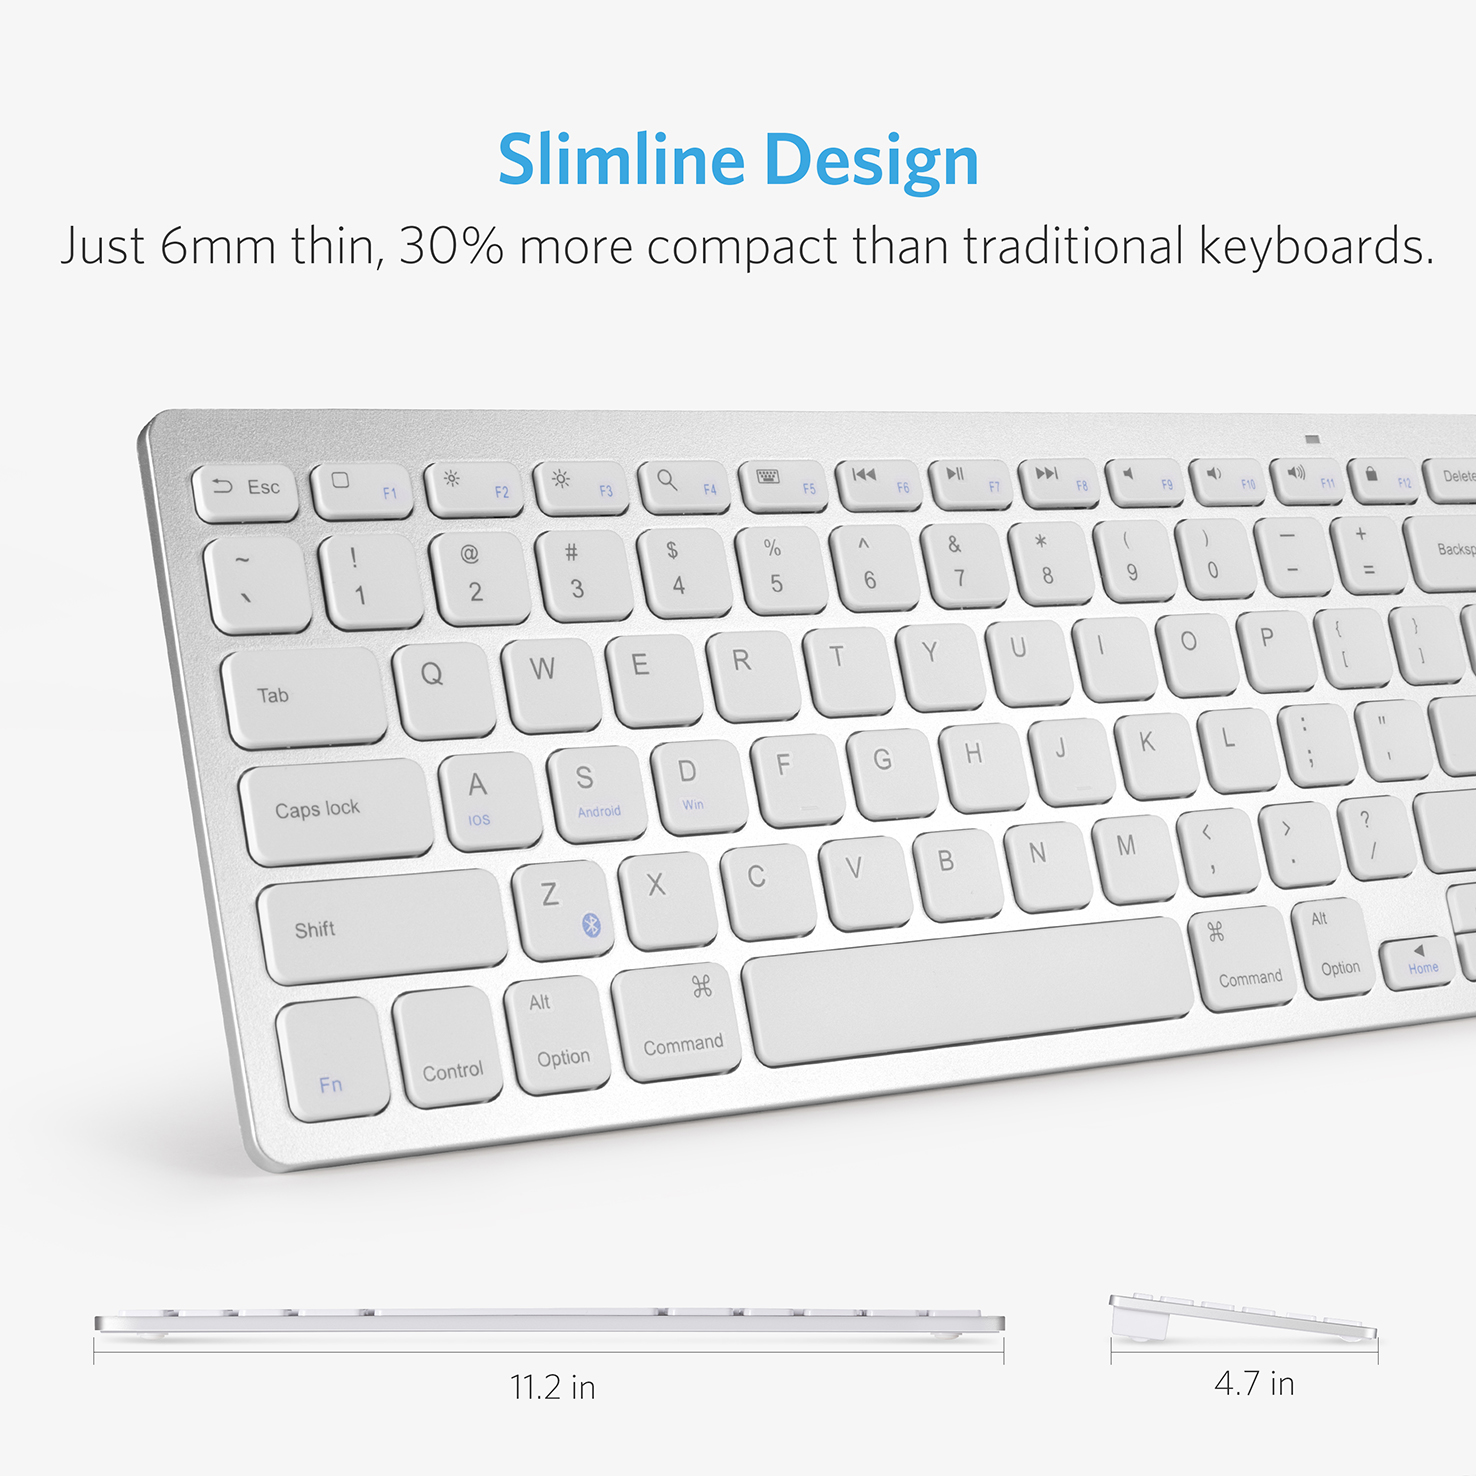 Anker Ultra Compact Slim Profile Wireless Bluetooth Keyboard for iOS, Android, Windows and Mac - image 2 of 6